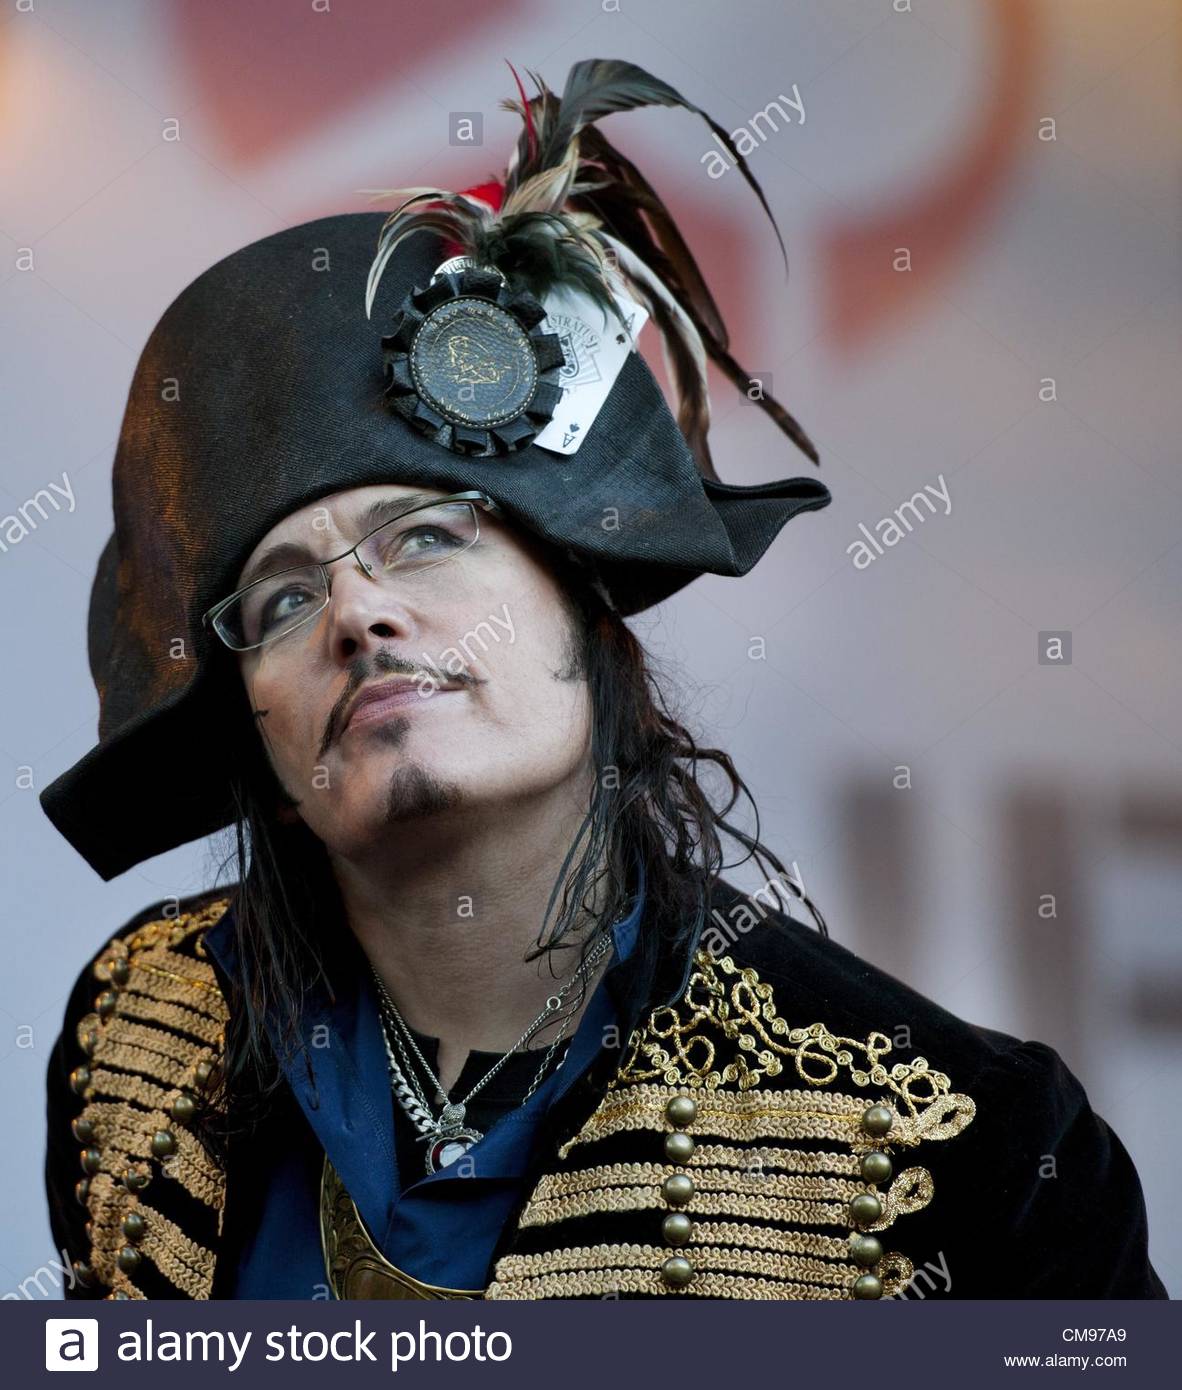 epa03279951-english-musician-adam-ant-performs-on-stage-during-a-concert-CM97A9.jpg